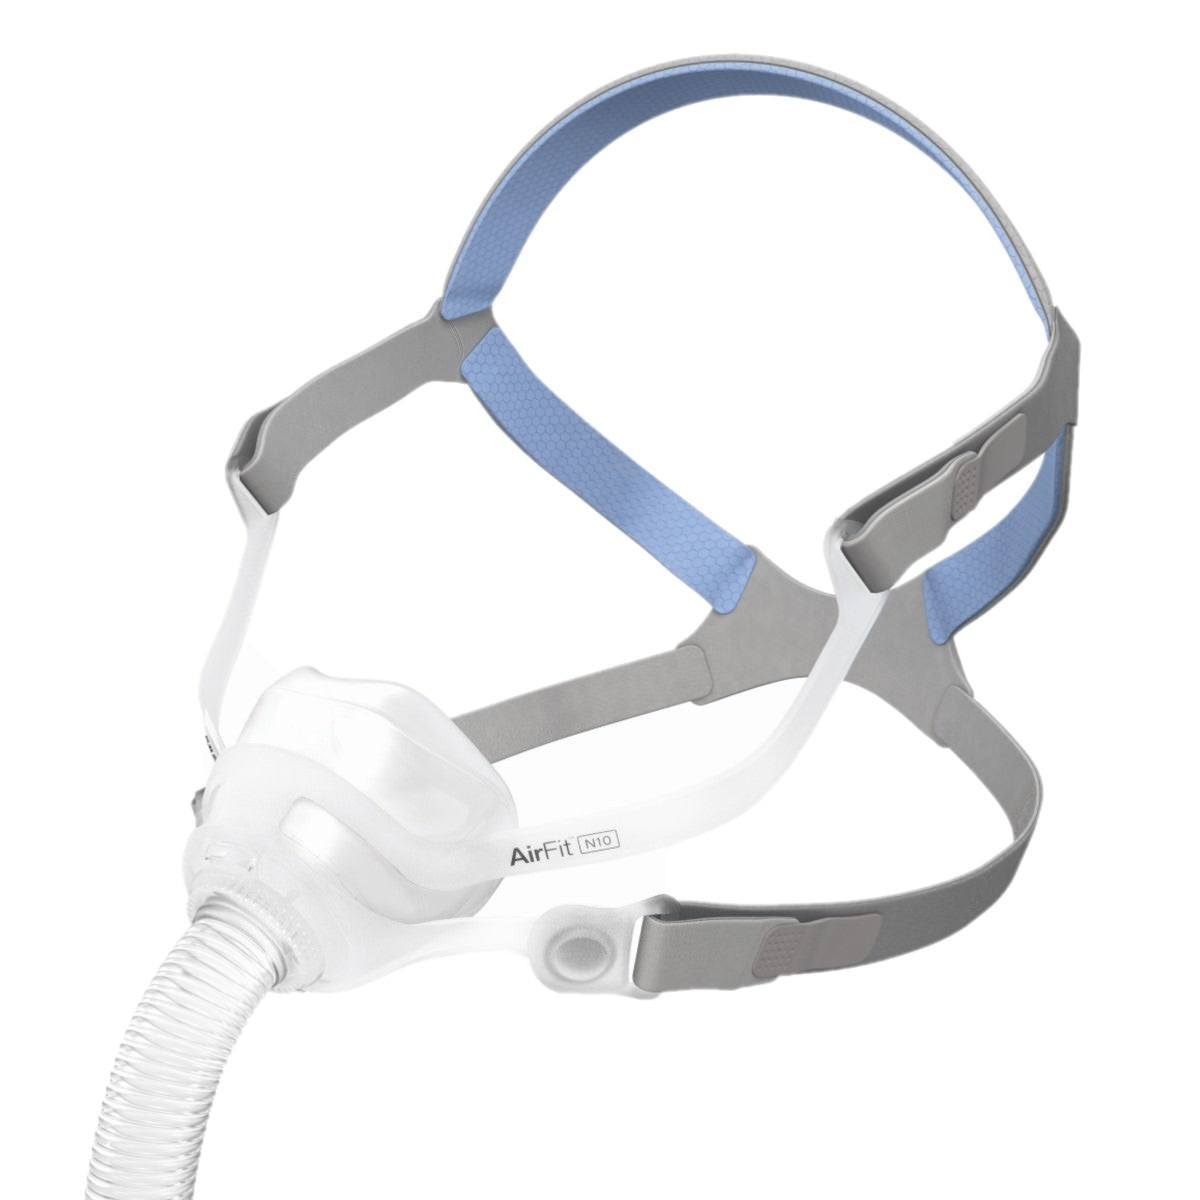 Resmed AirFit N10 Nasal Mask System with Headgear